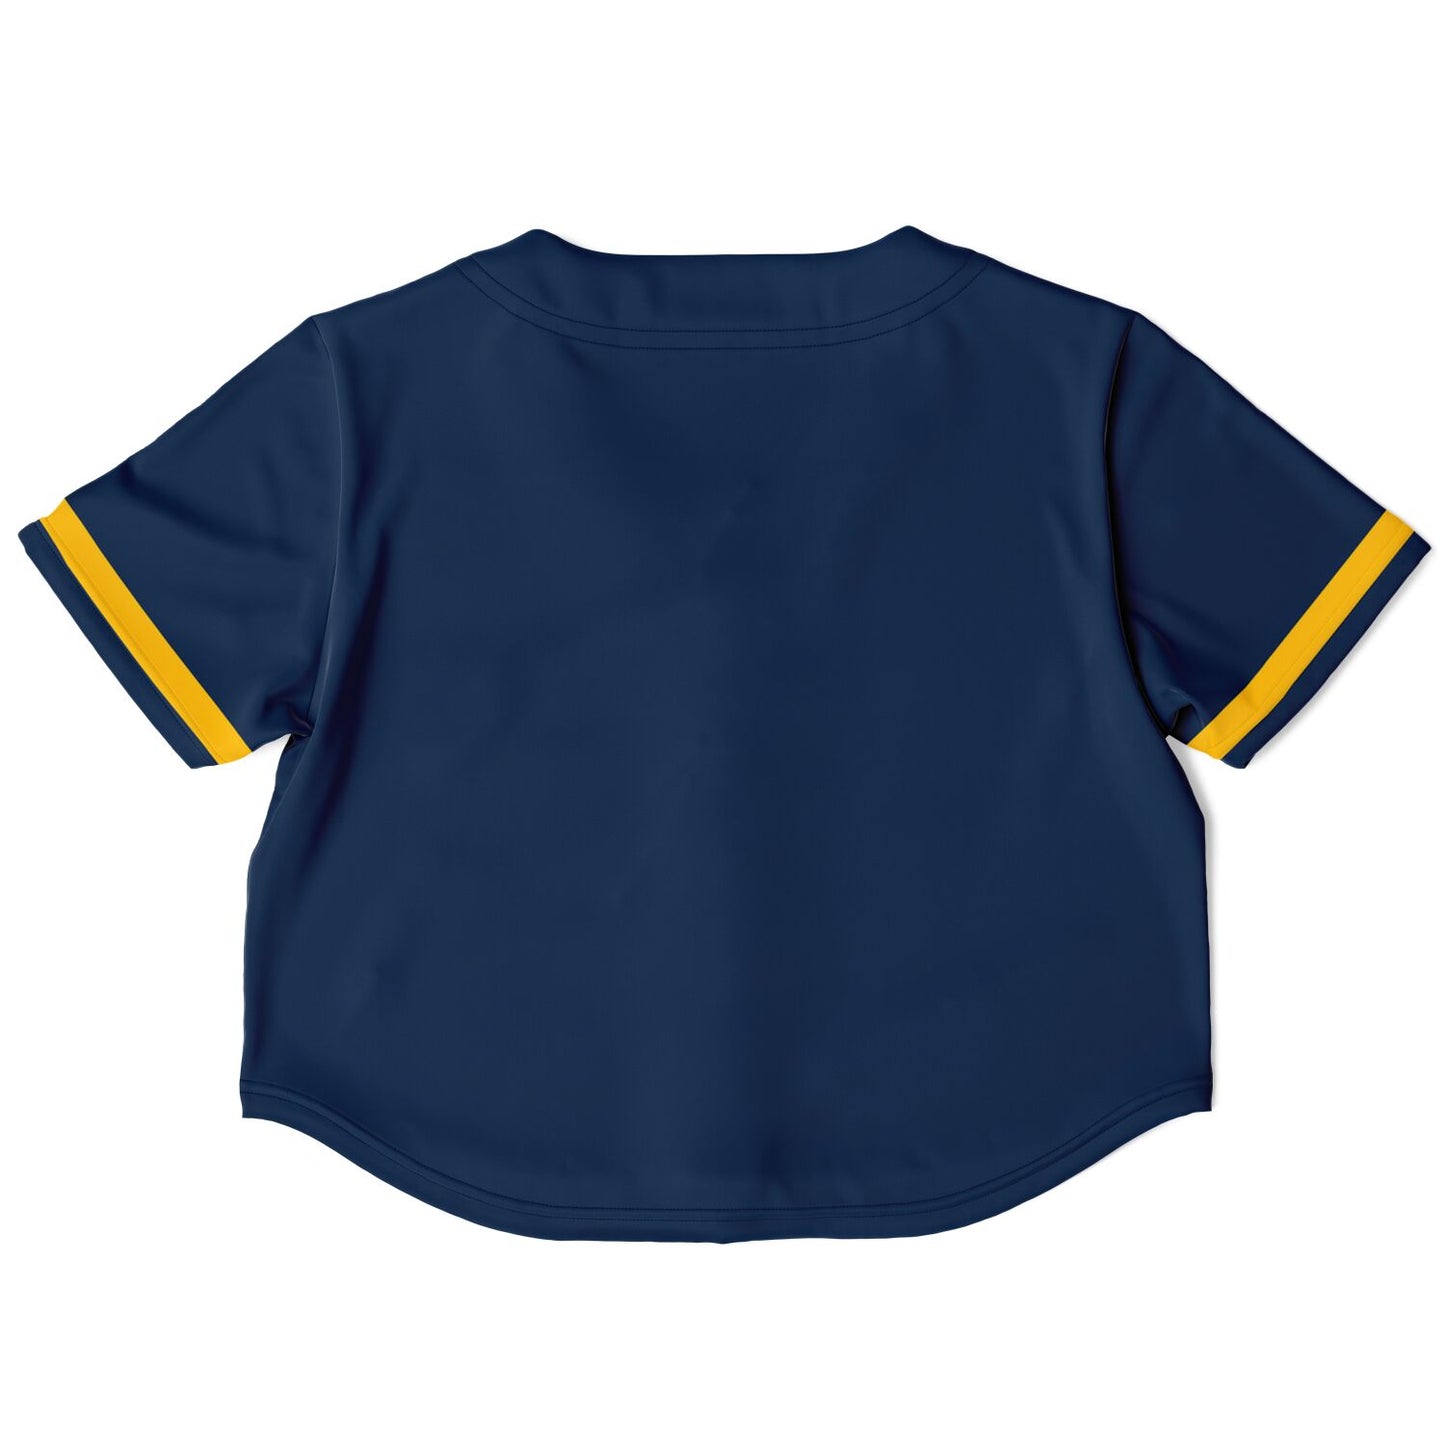 Chicago Vocational School Cropped Baseball Jersey | CVS Cavaliers